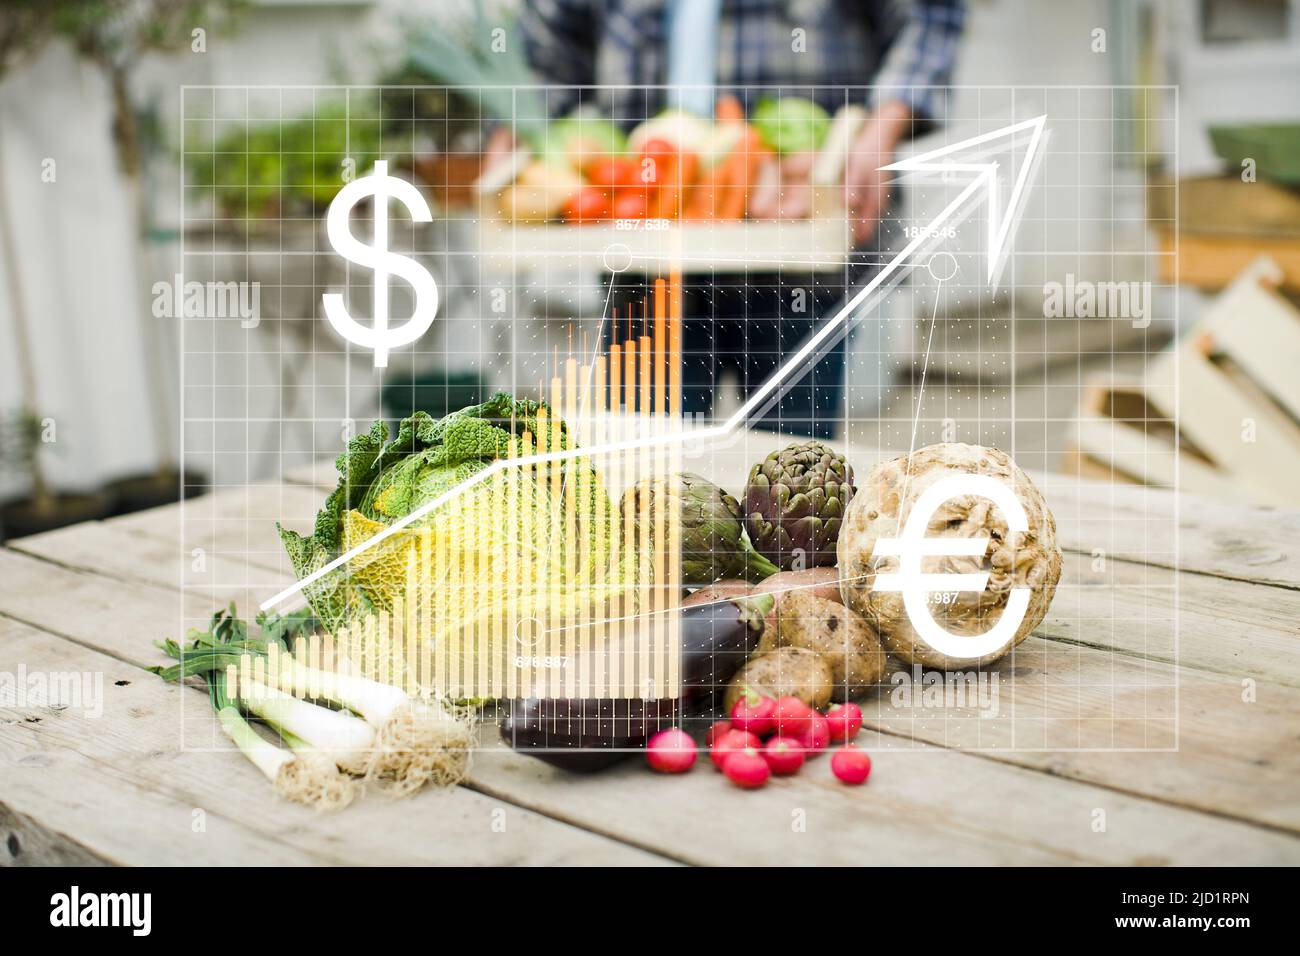 Financial chart and heap of vegetables Stock Photo